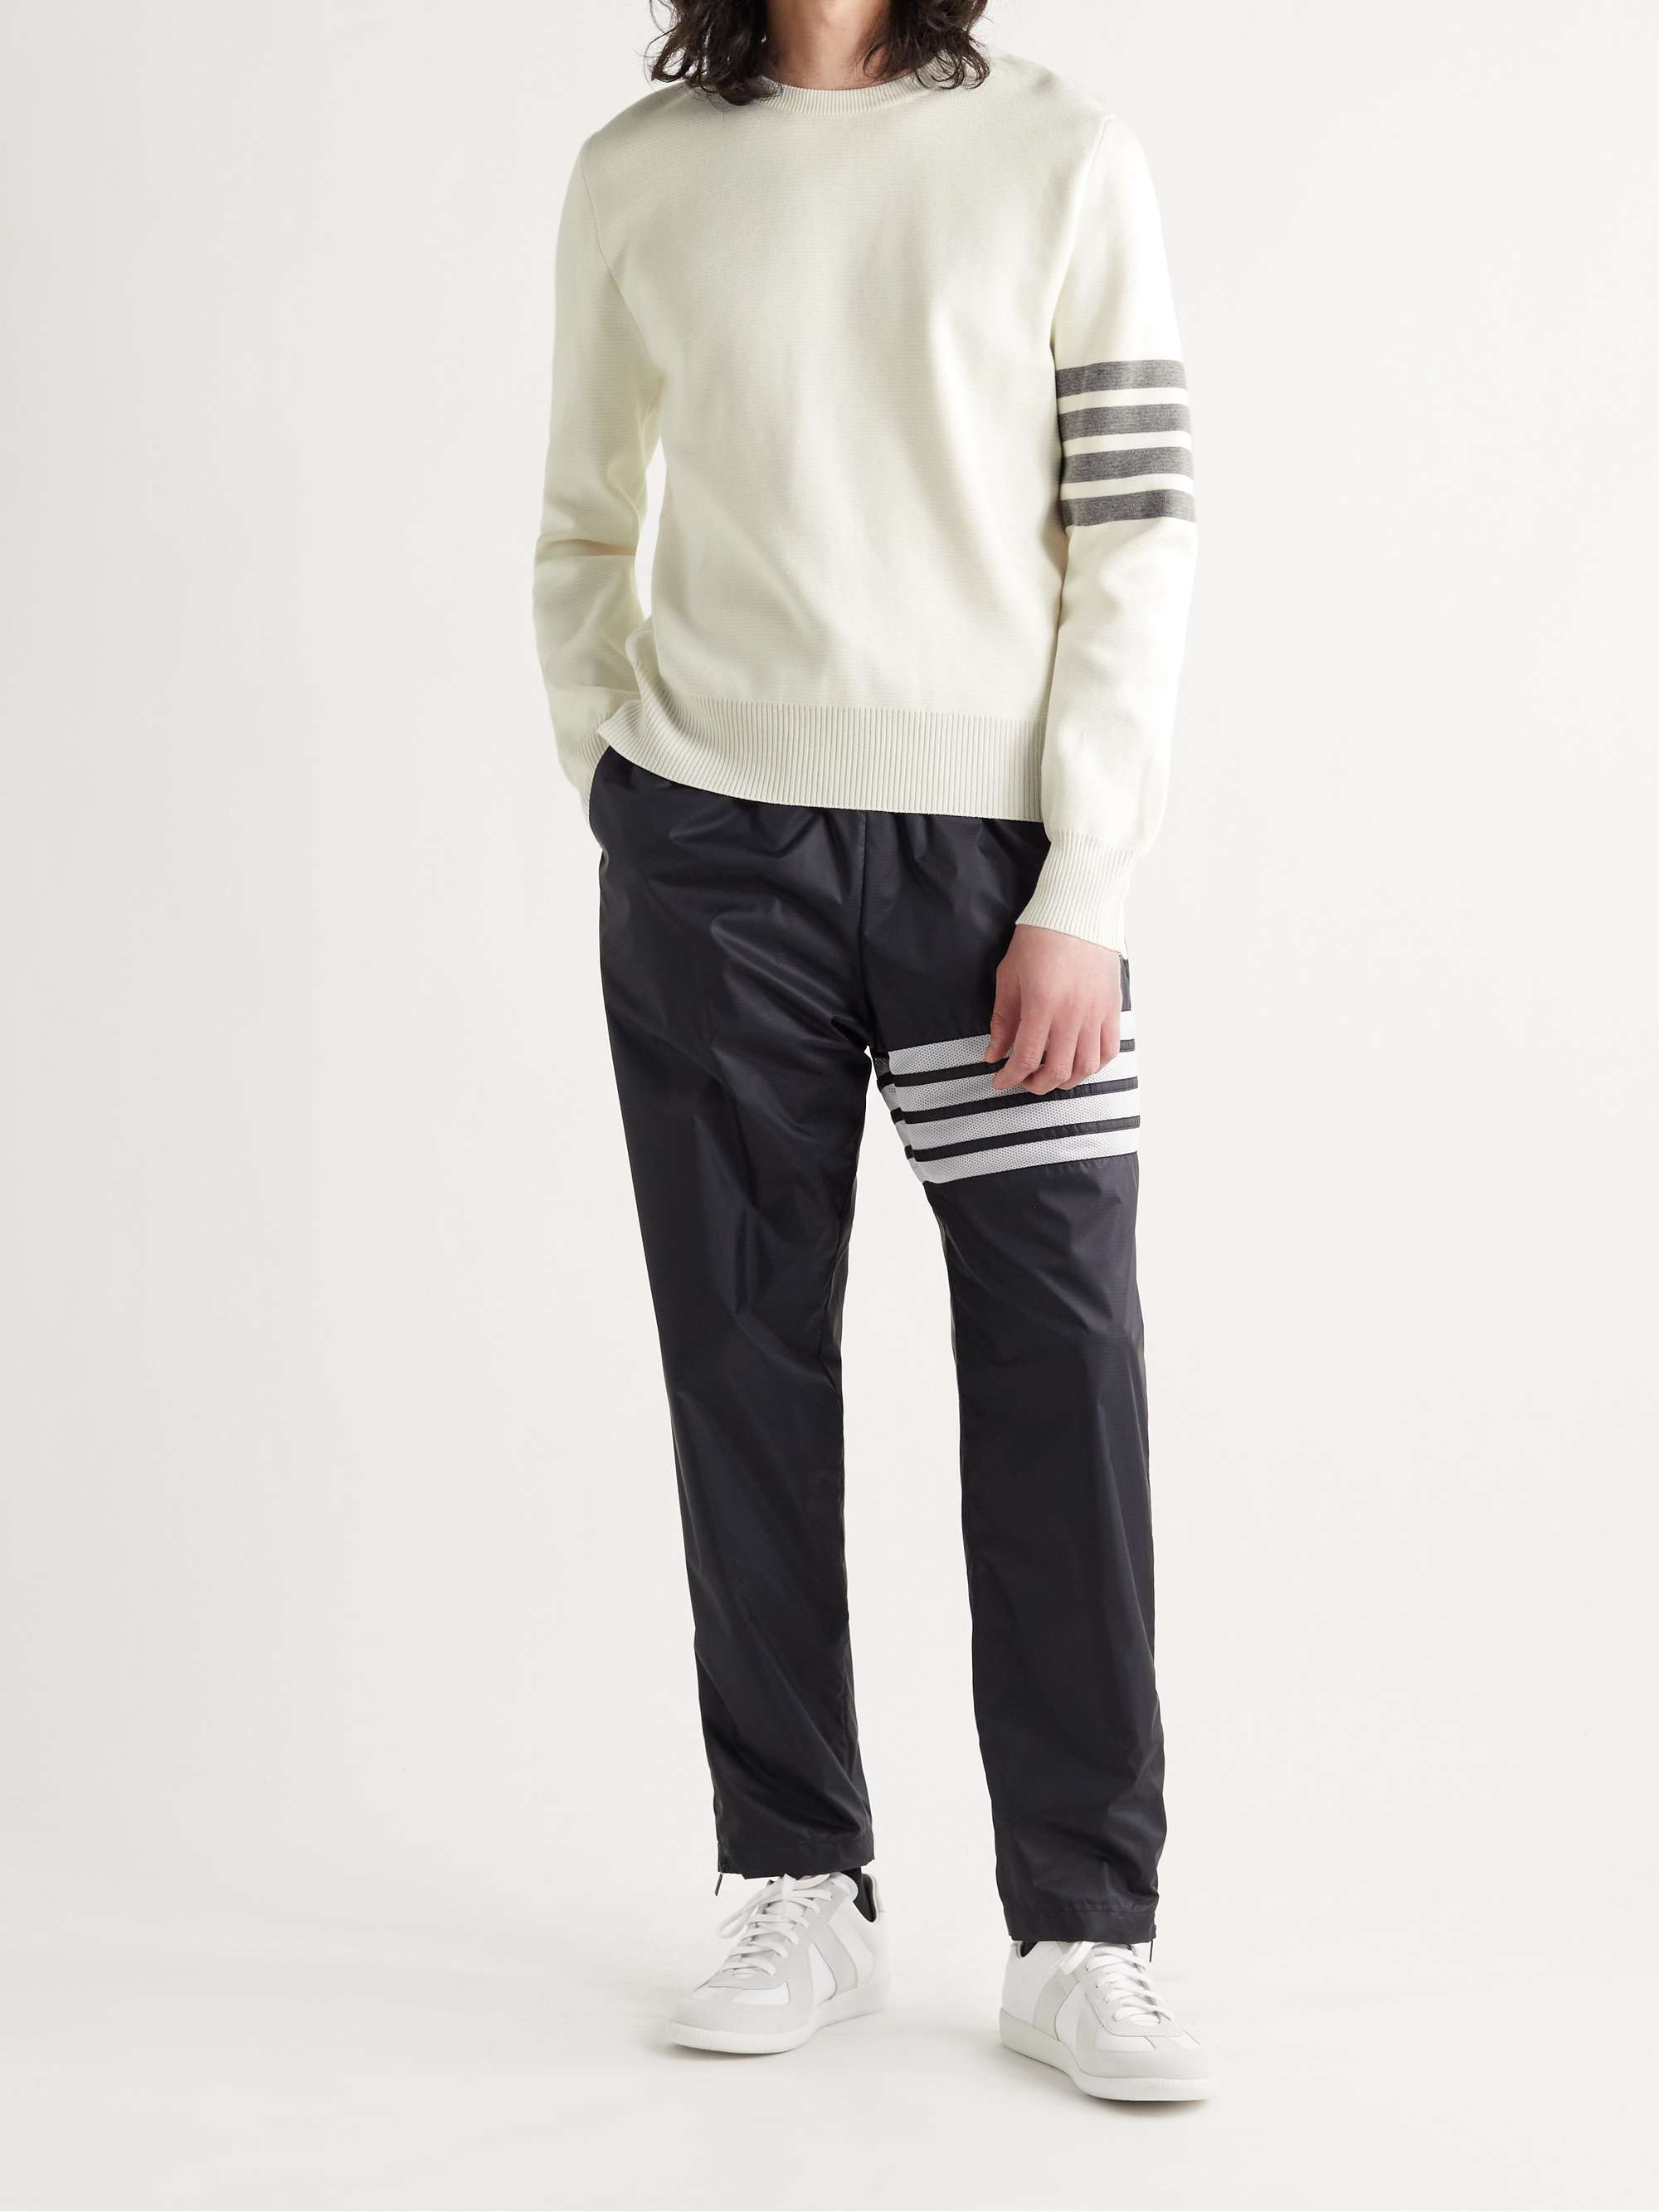 THOM BROWNE Striped Grosgrain-Trimmed Cotton Sweater